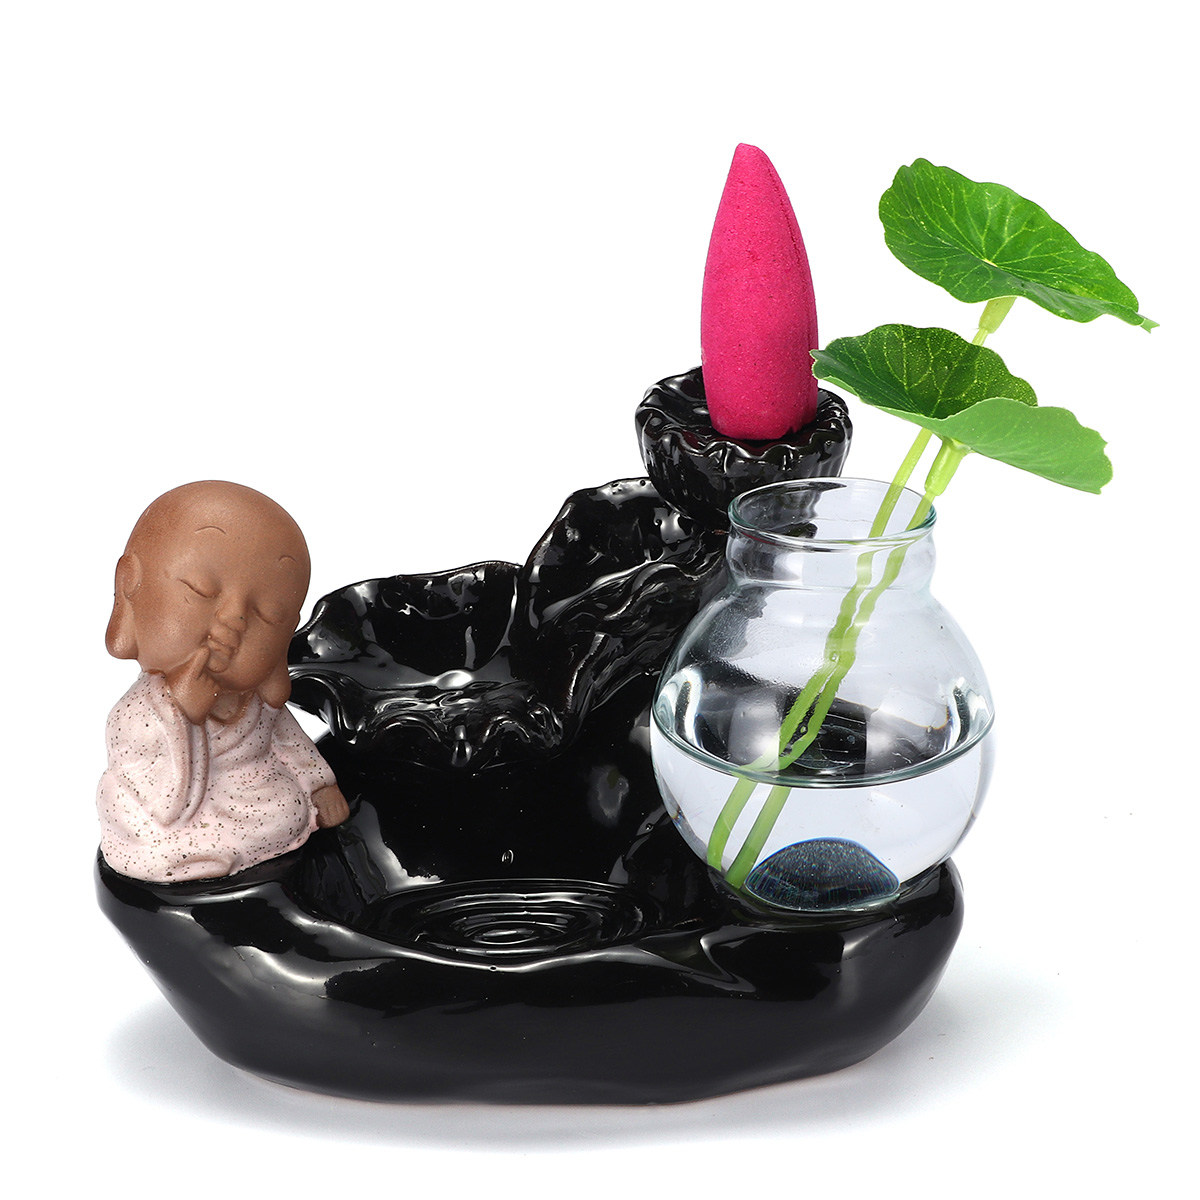 

Ceramic Small Monk Back-flow Incense Burner Buddhist Cone Censer Holder With Glass Hydroponic Pot